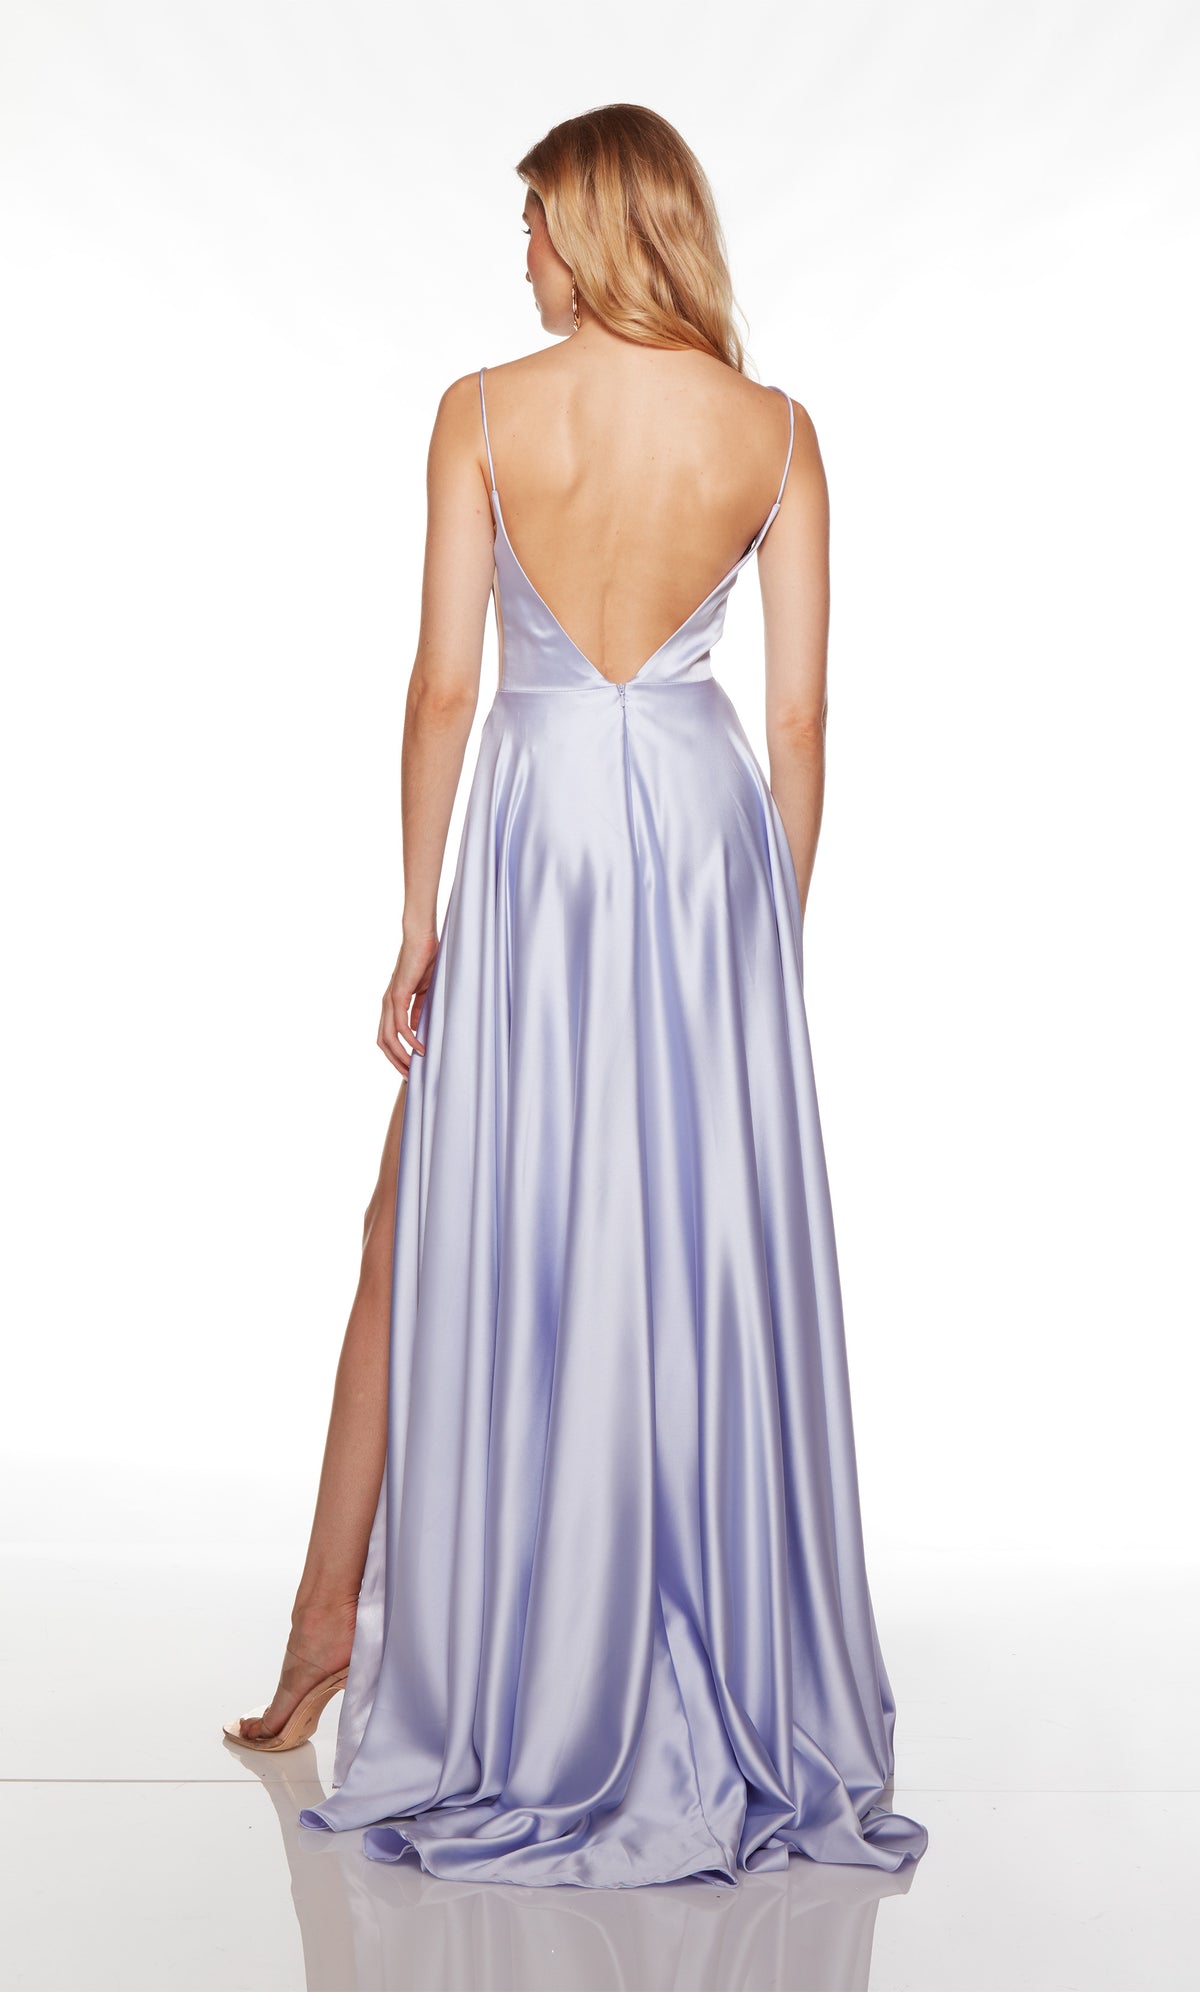 Lilac purple dress with a V shaped open back and train.